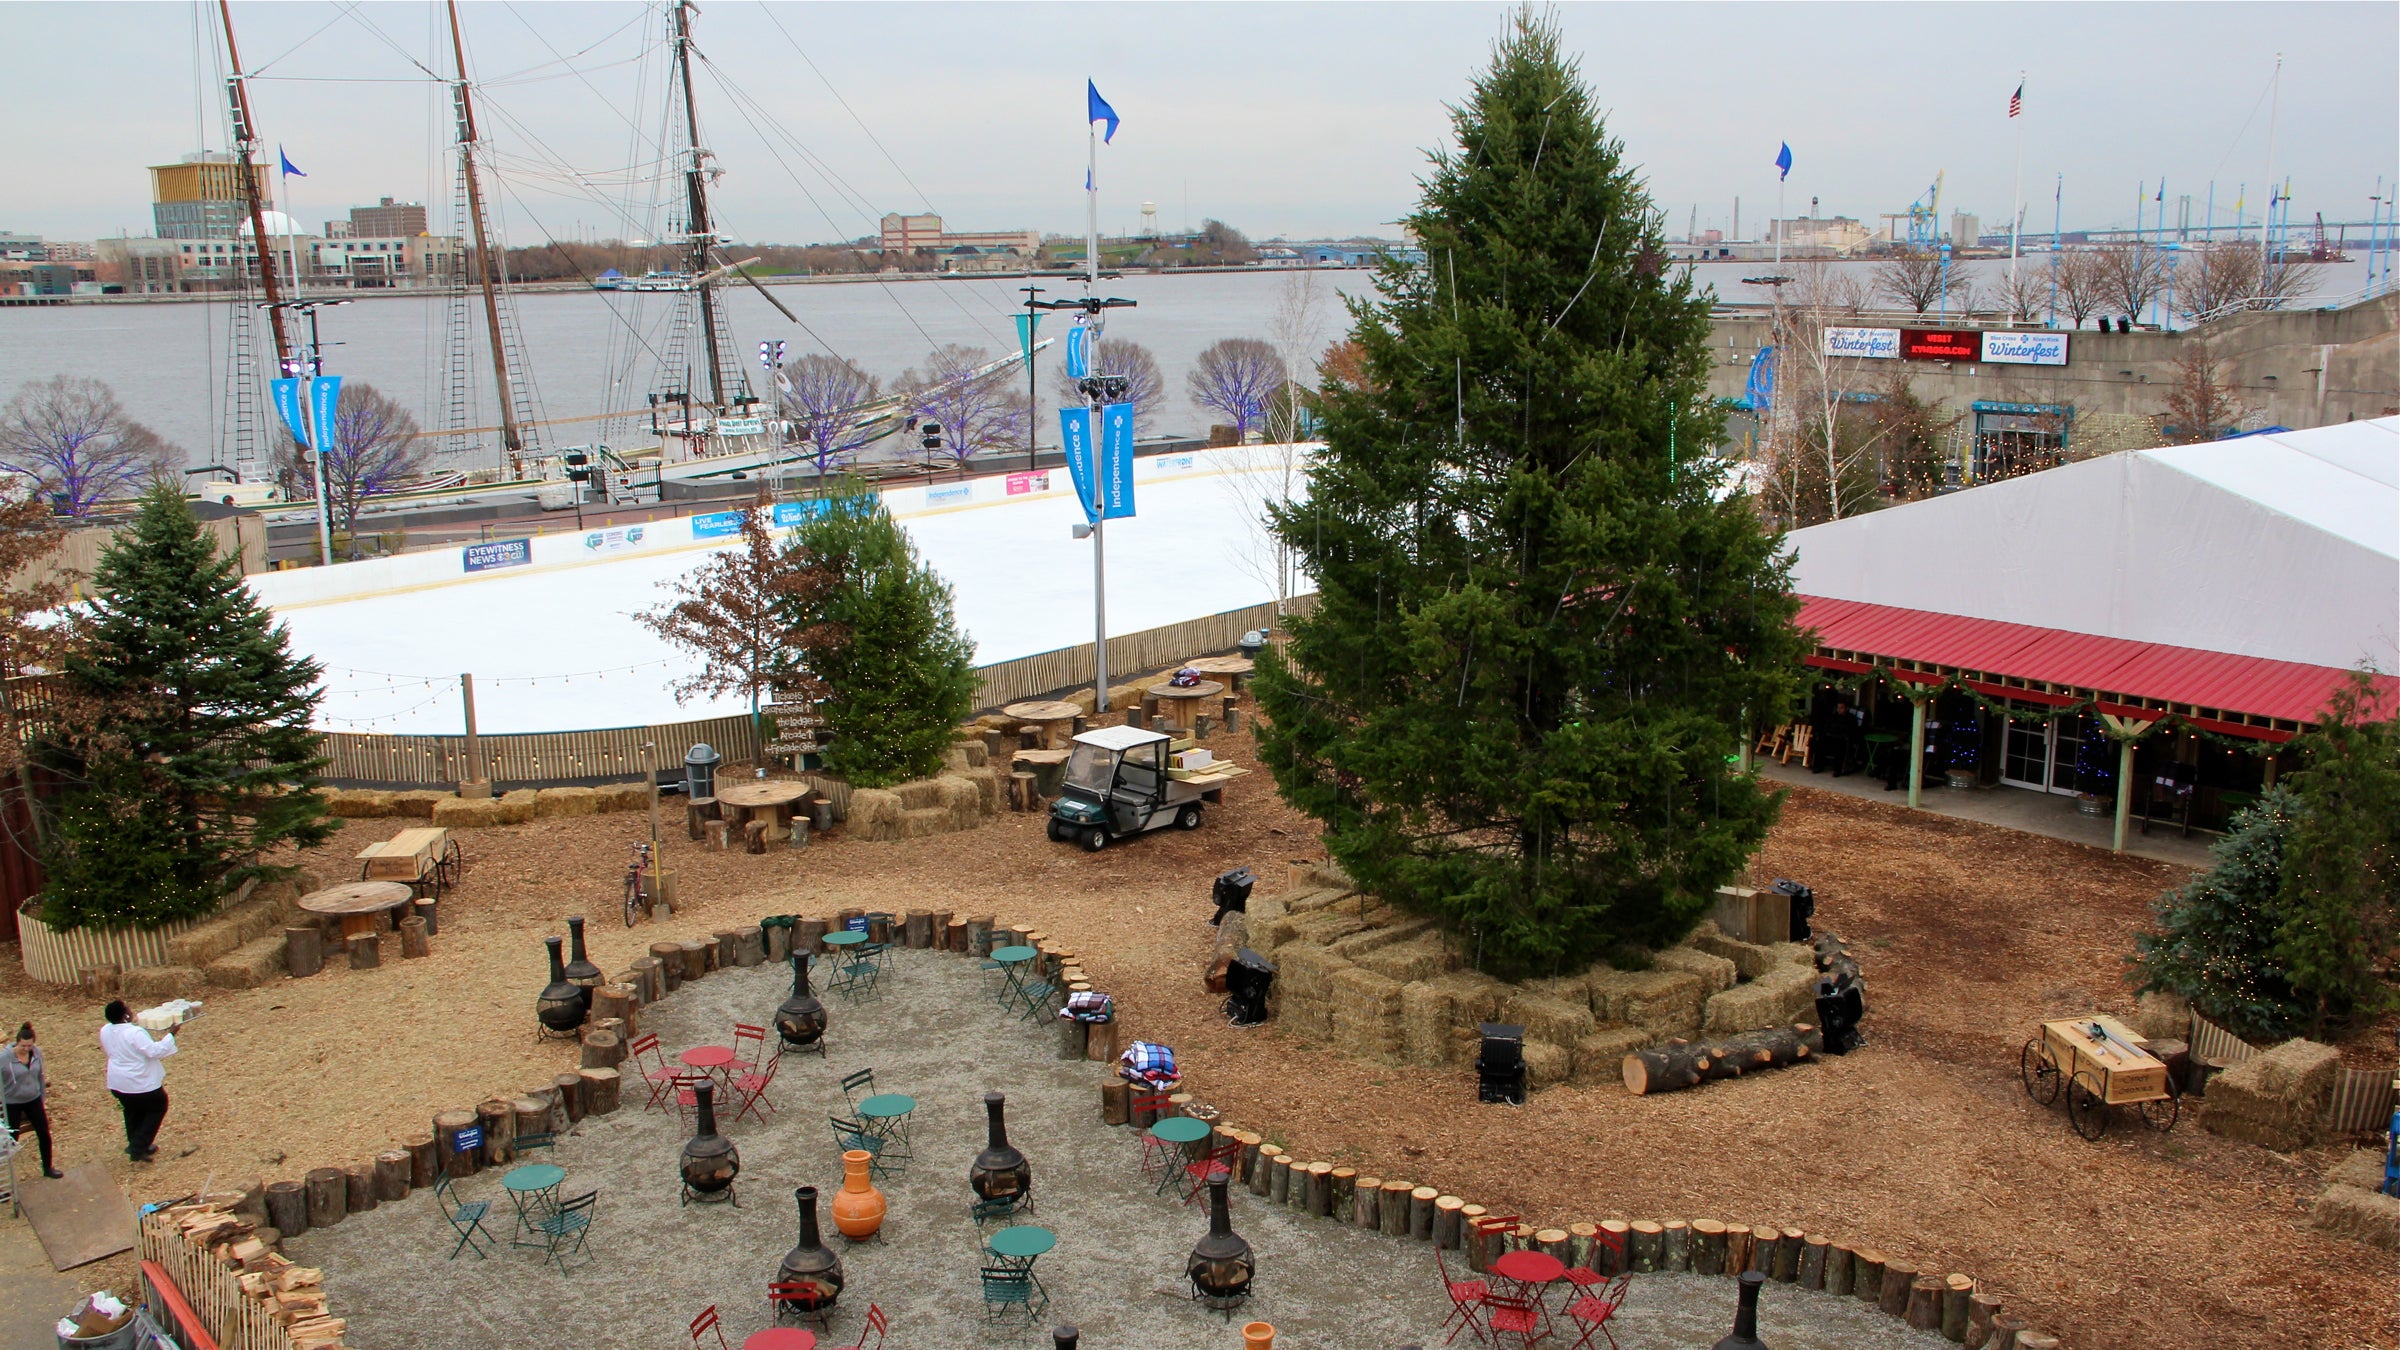 Winterfest picks up where Spruce Street Harbor Park left off, repurposing themes and elements to create a ski lodge fantasy on the Delaware. (Emma Lee/WHYY)